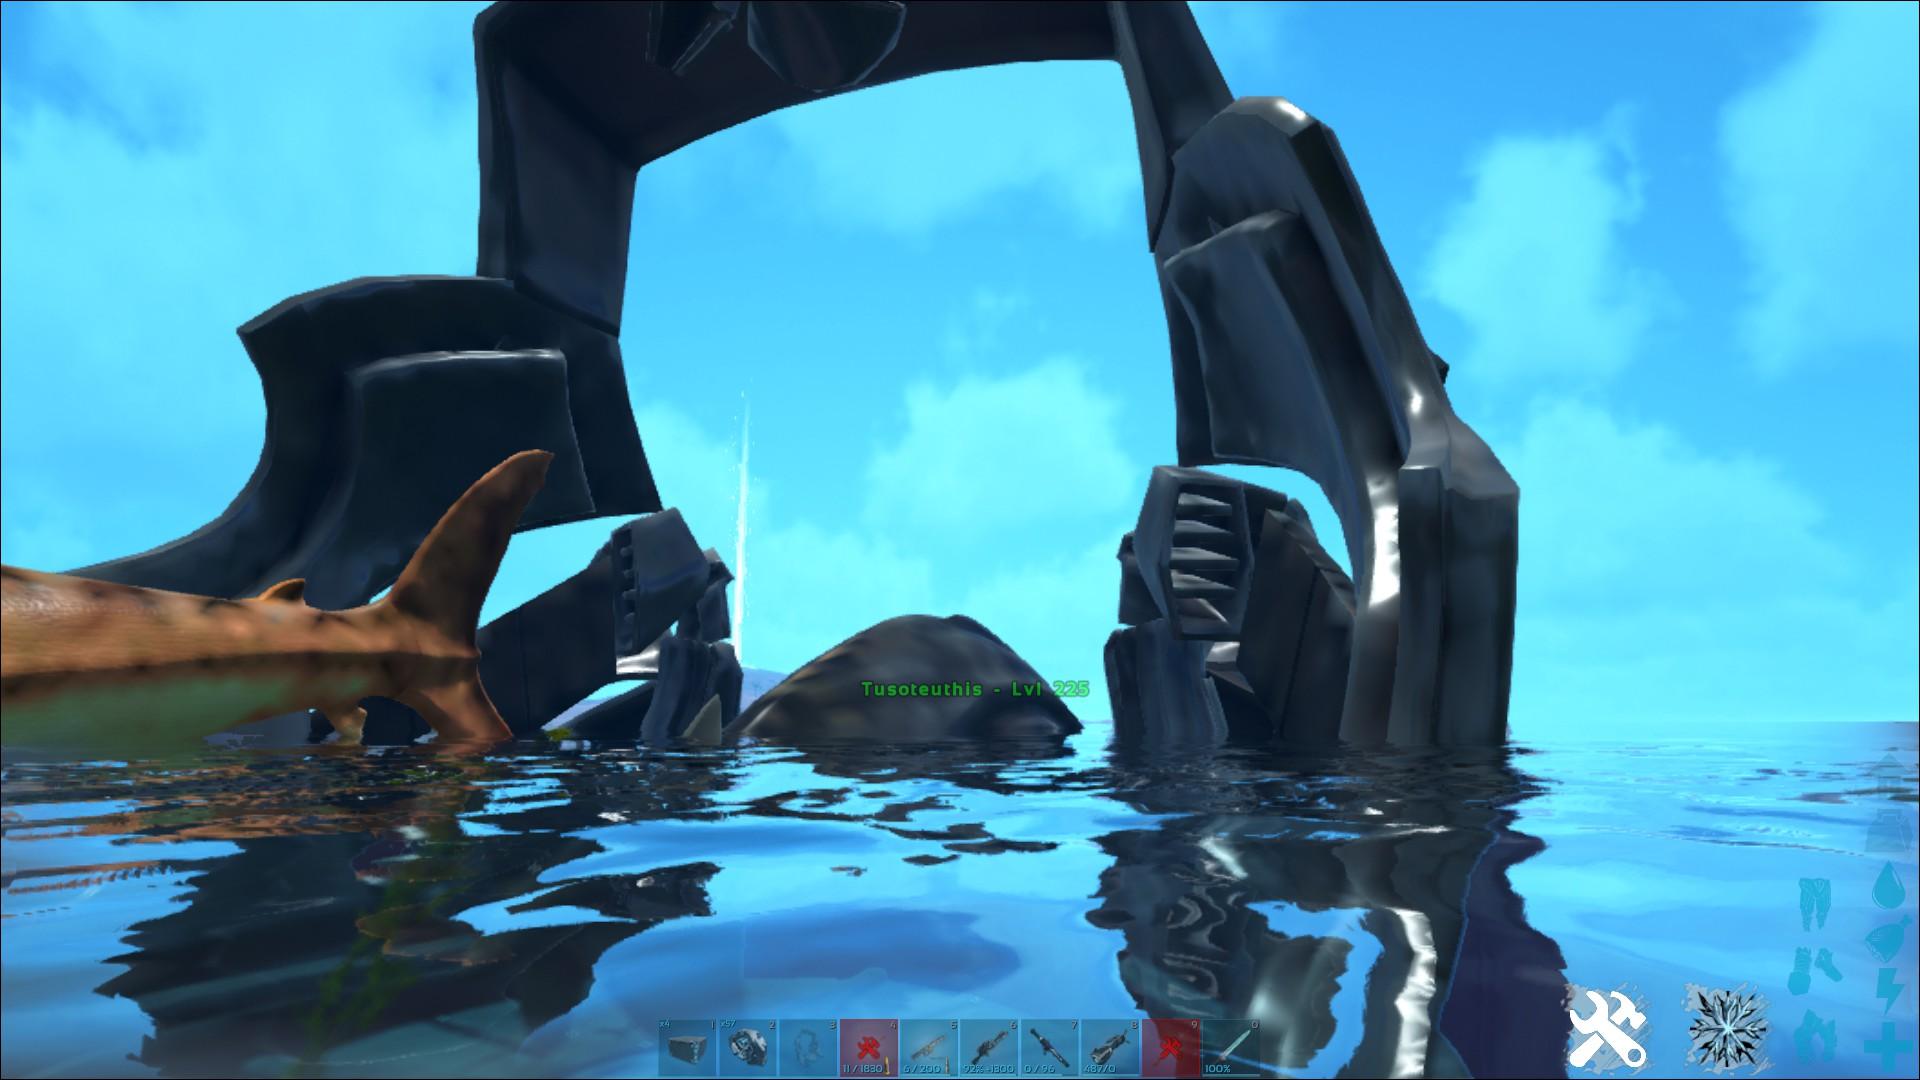 Can cloning chamber be used for land/sea dinos if positioned - General